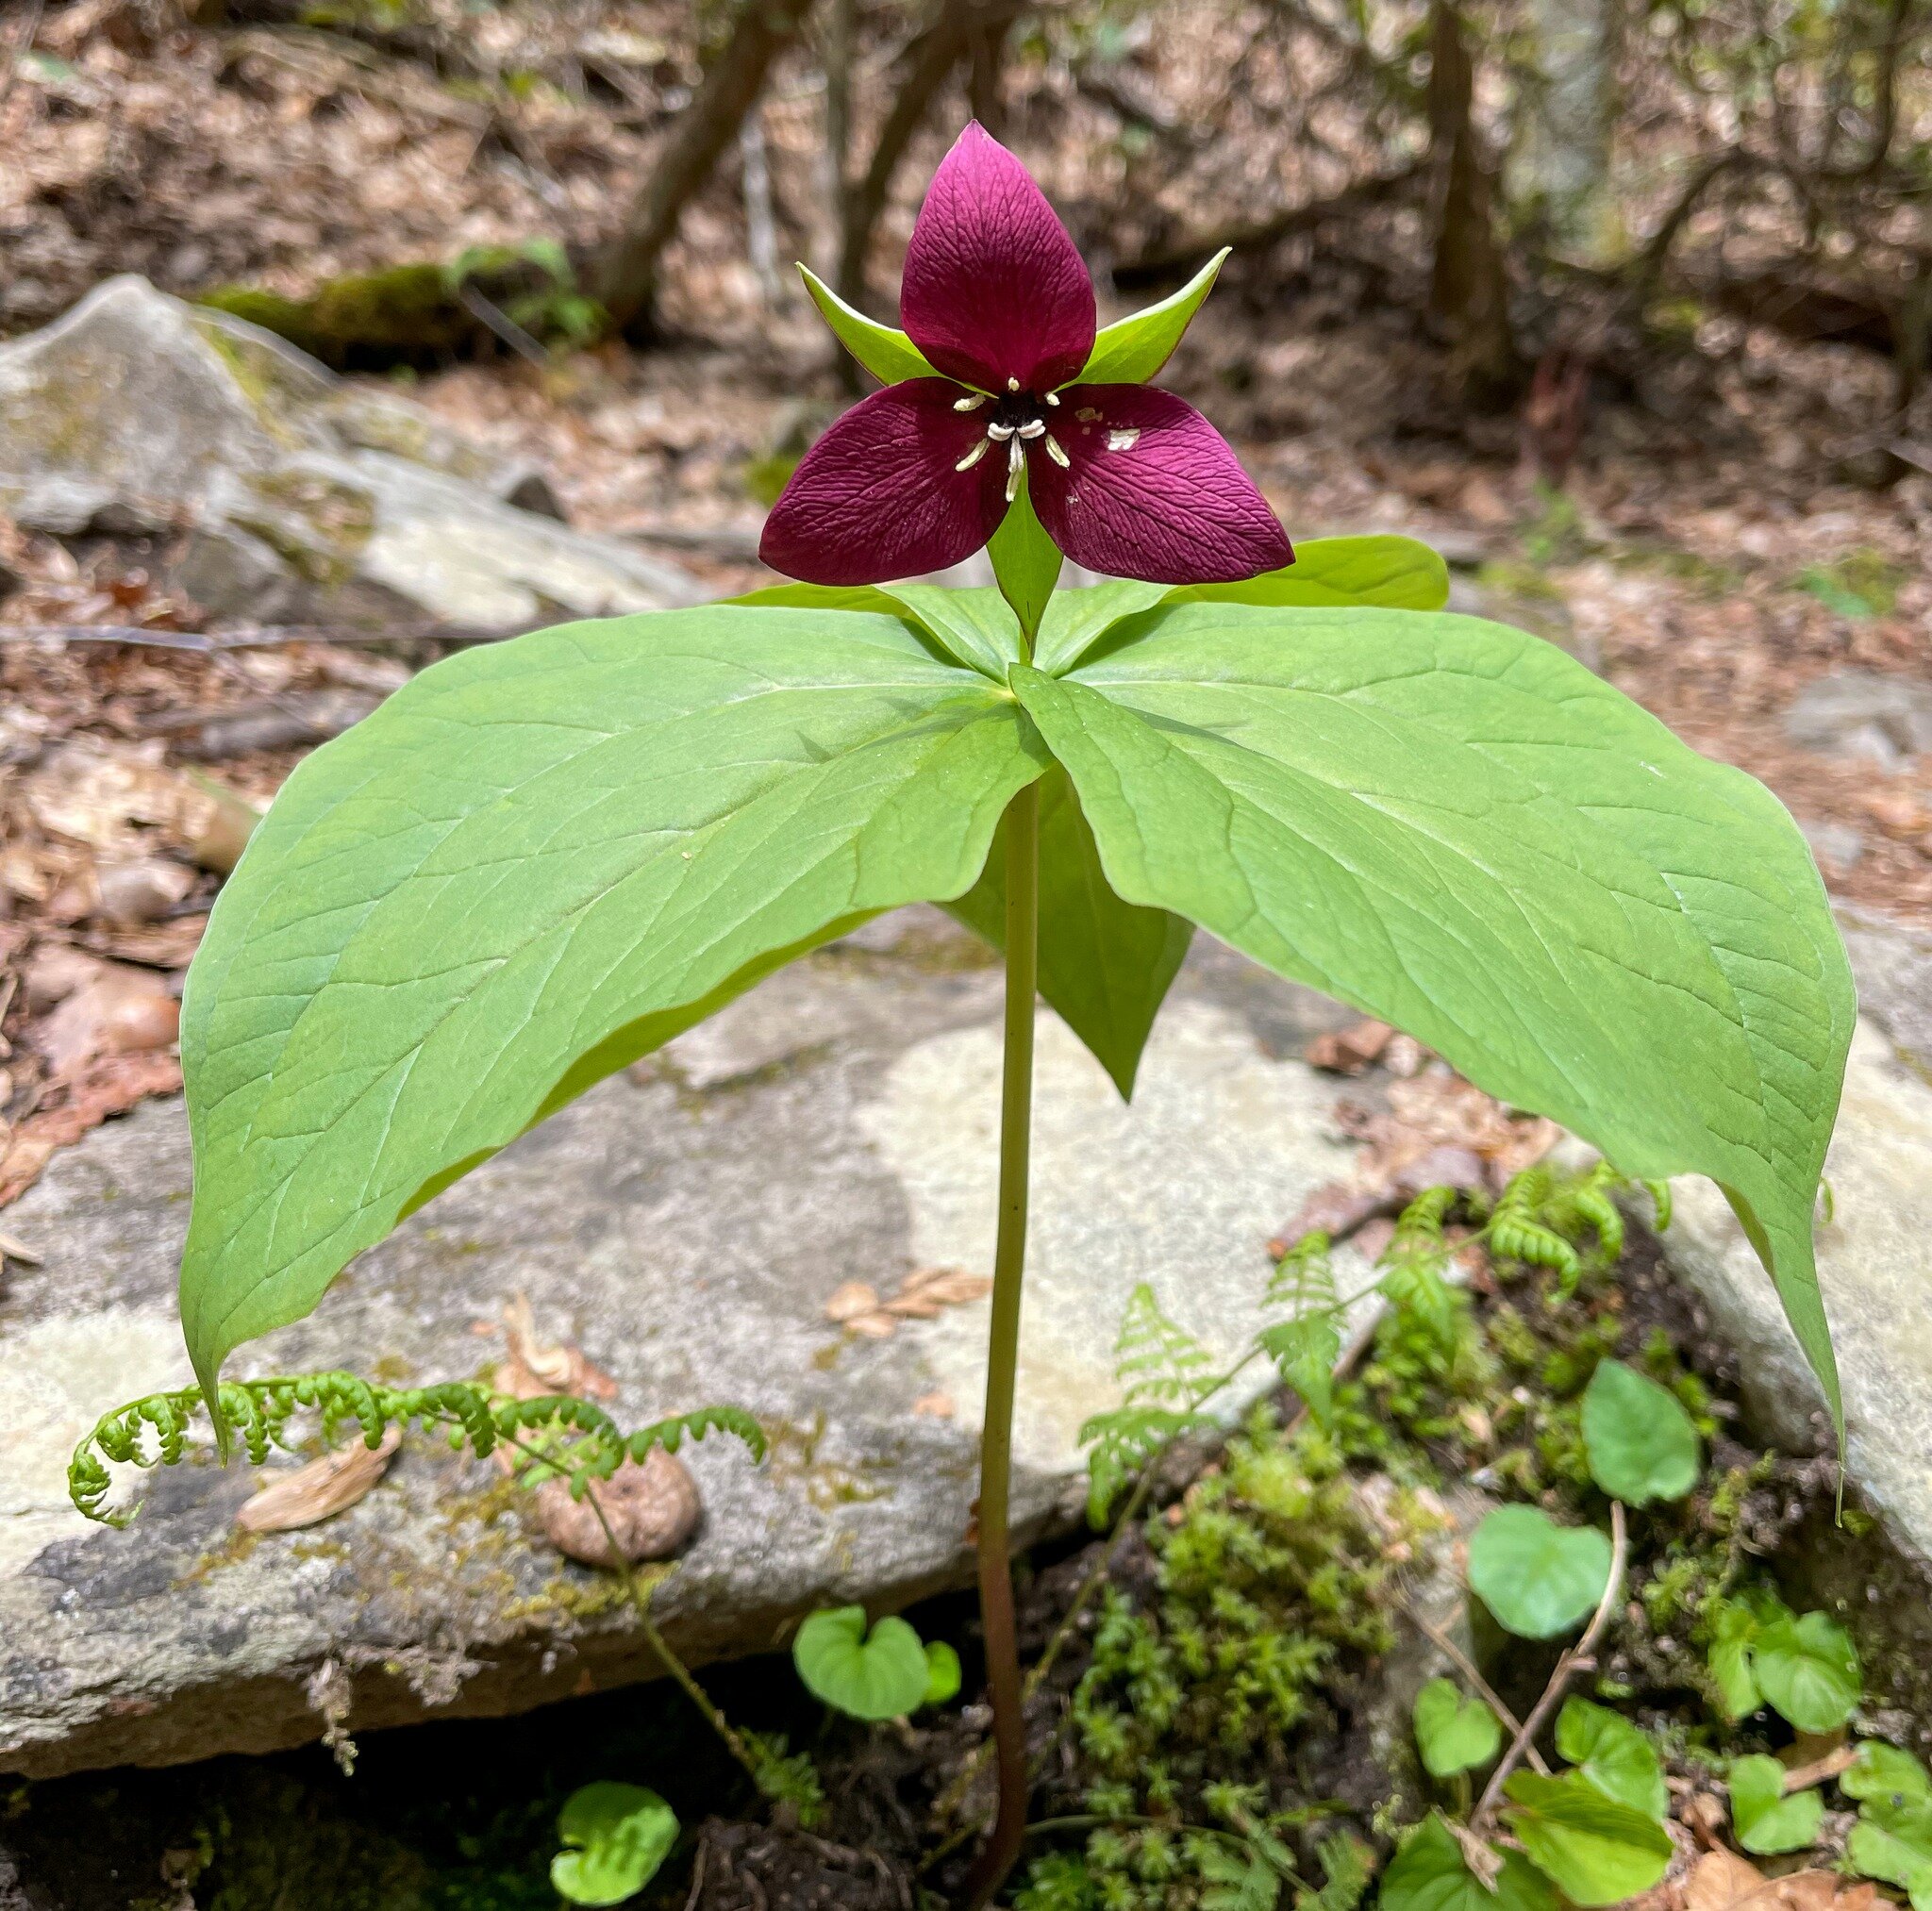 Take a look at this beautiful red trillium our Conservation &amp; GIS Specialist @michaelinforests grabbed this great photo of!

We love all of the sights, smells, and sounds of spring coming from the beautiful mountains and foothills of western NC. 